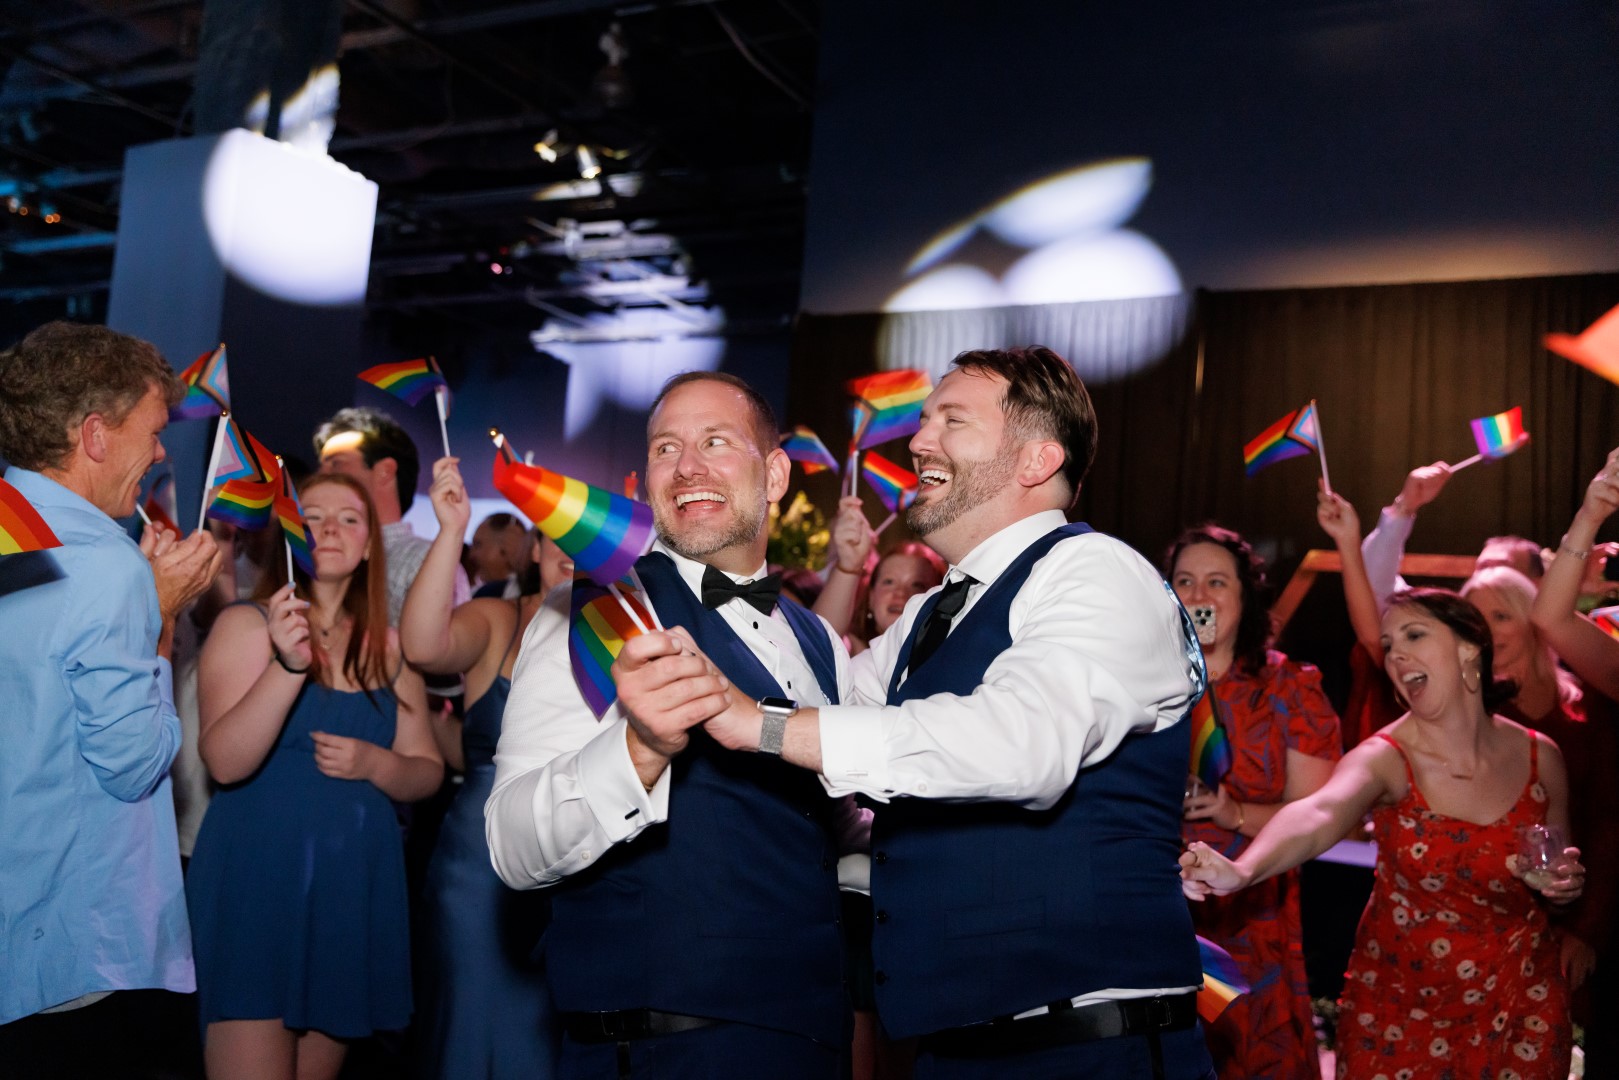 Andrew and Joe dancing at their wedding while holding pride flags